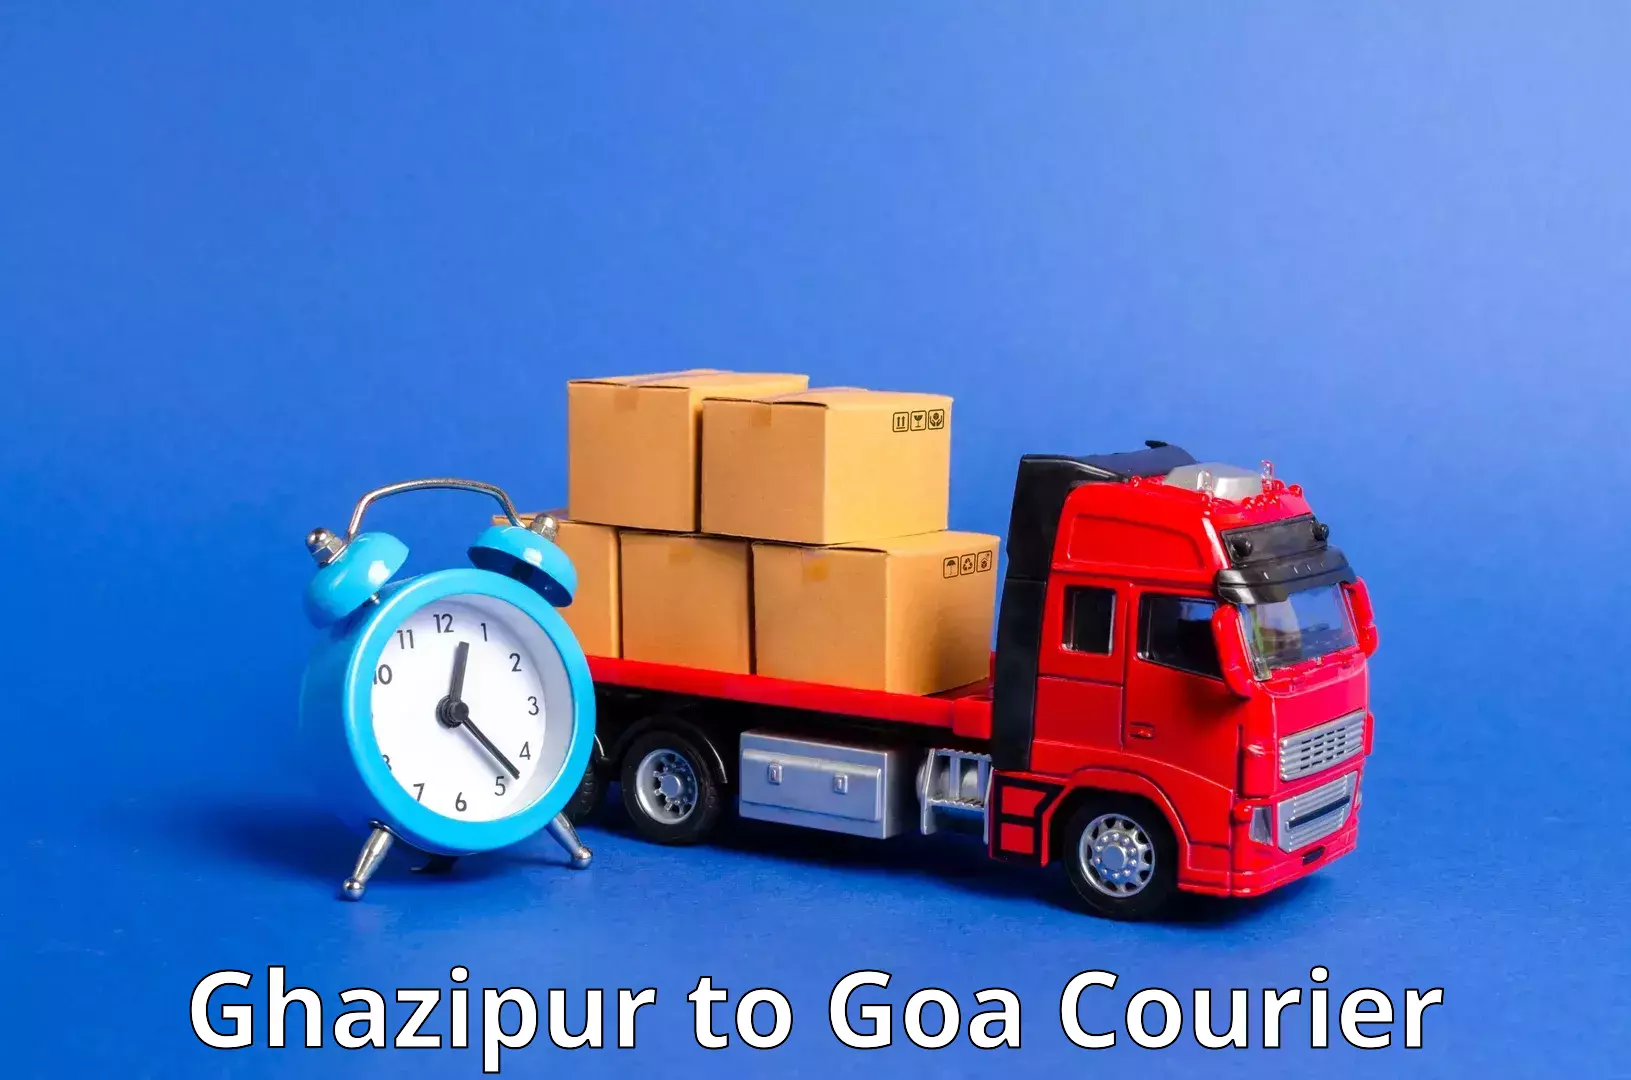 Business delivery service Ghazipur to Goa University